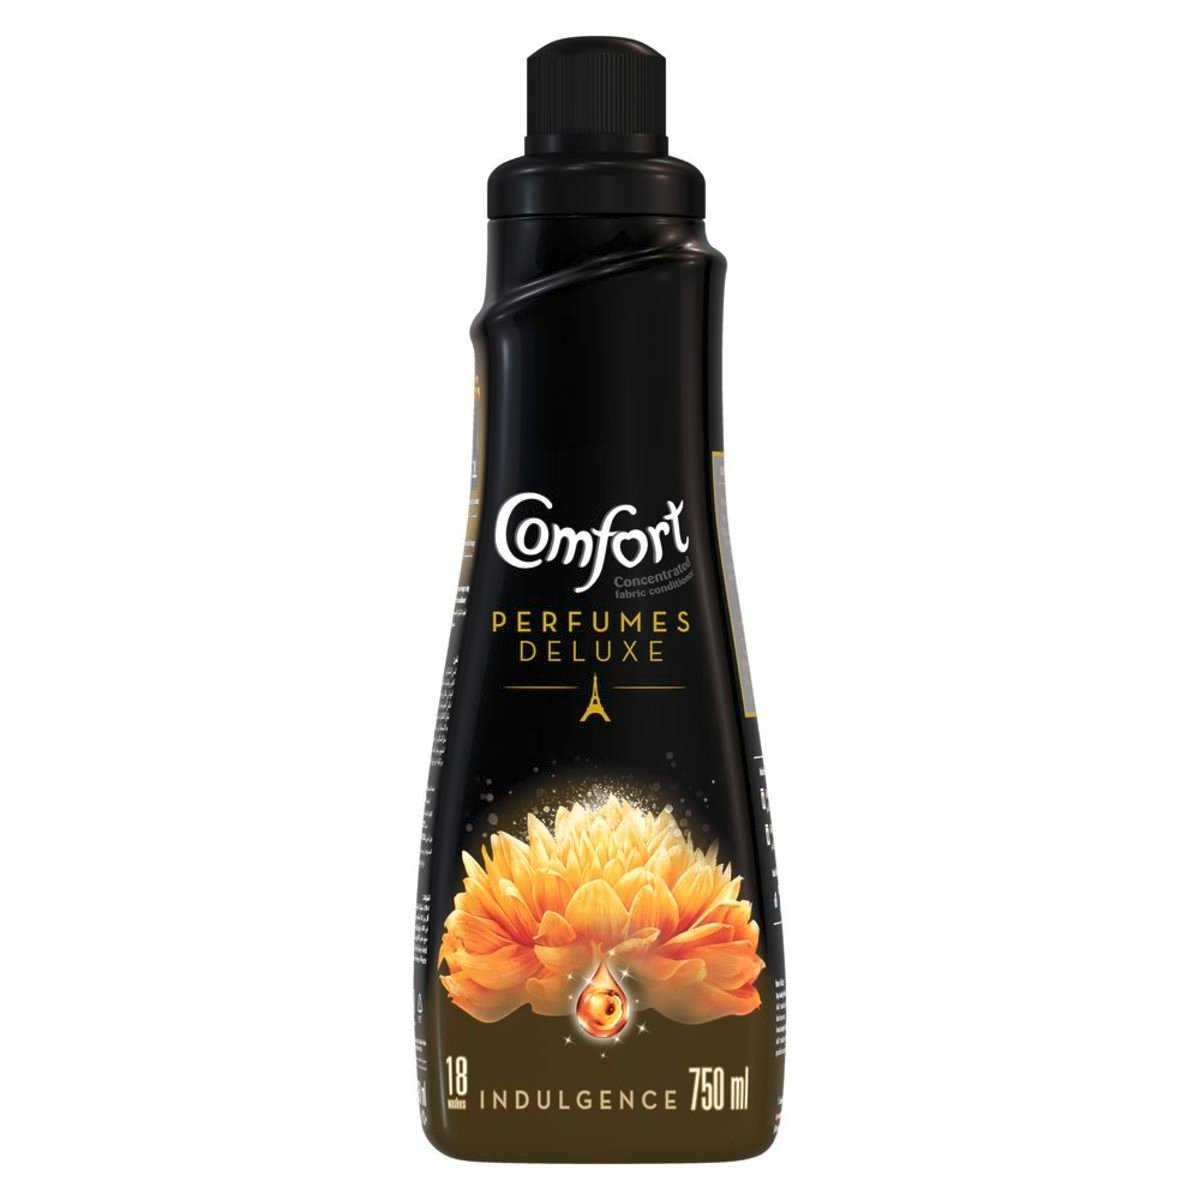 Comfort Perfumes Deluxe Concentrated Fabric Softener Indulgence 750ml